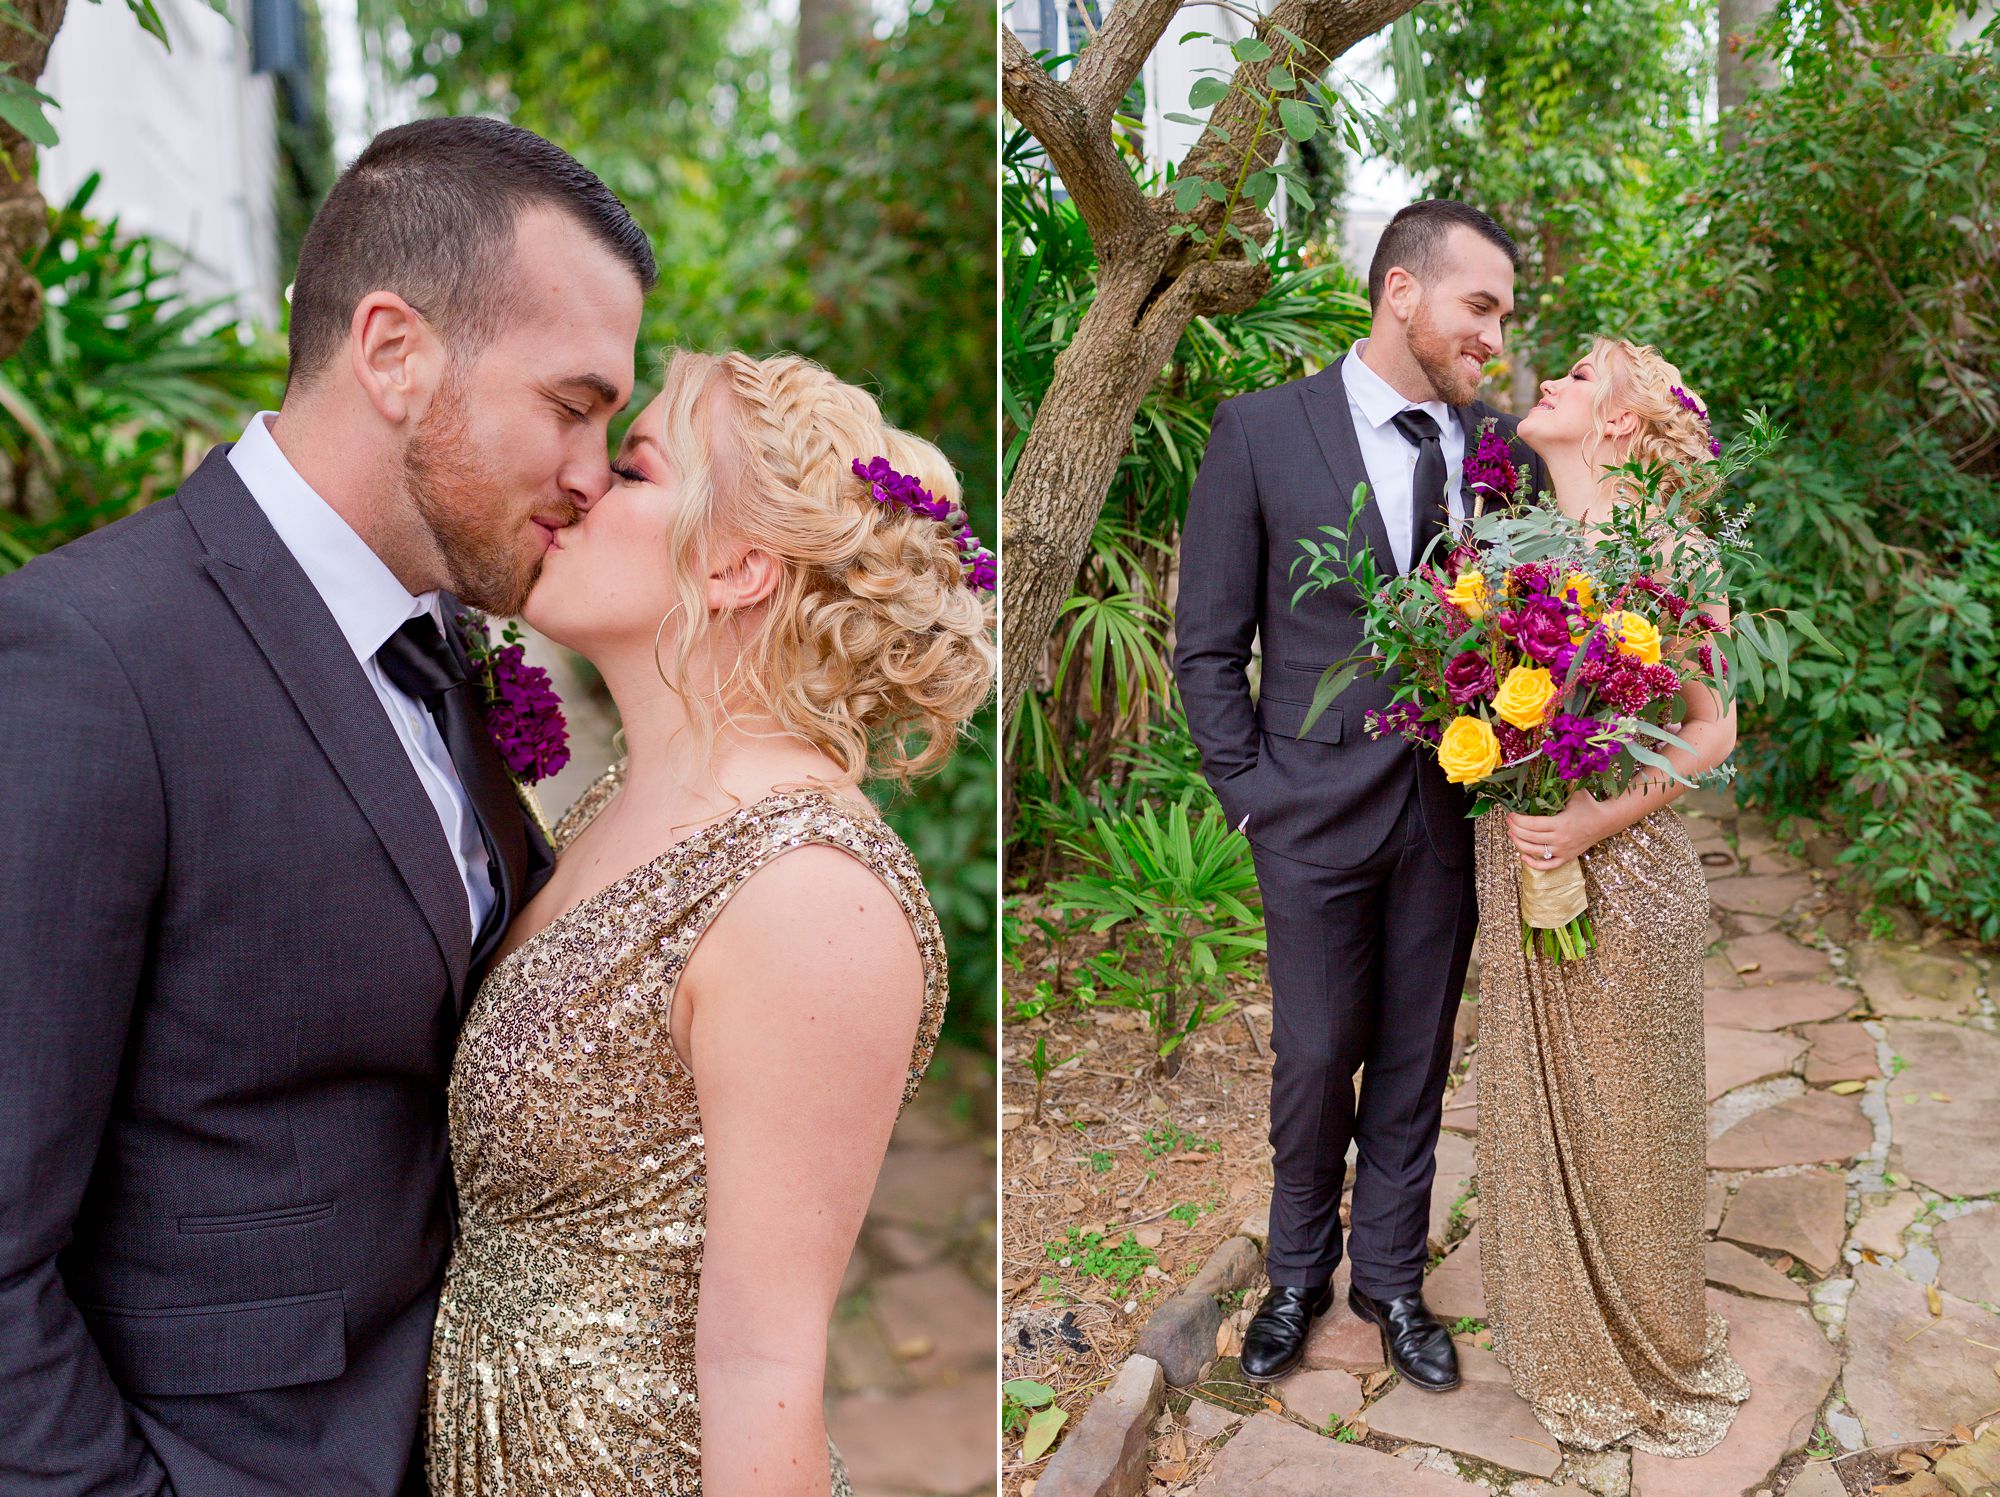 Portrait of a bride and groom kissing and smiling at each other